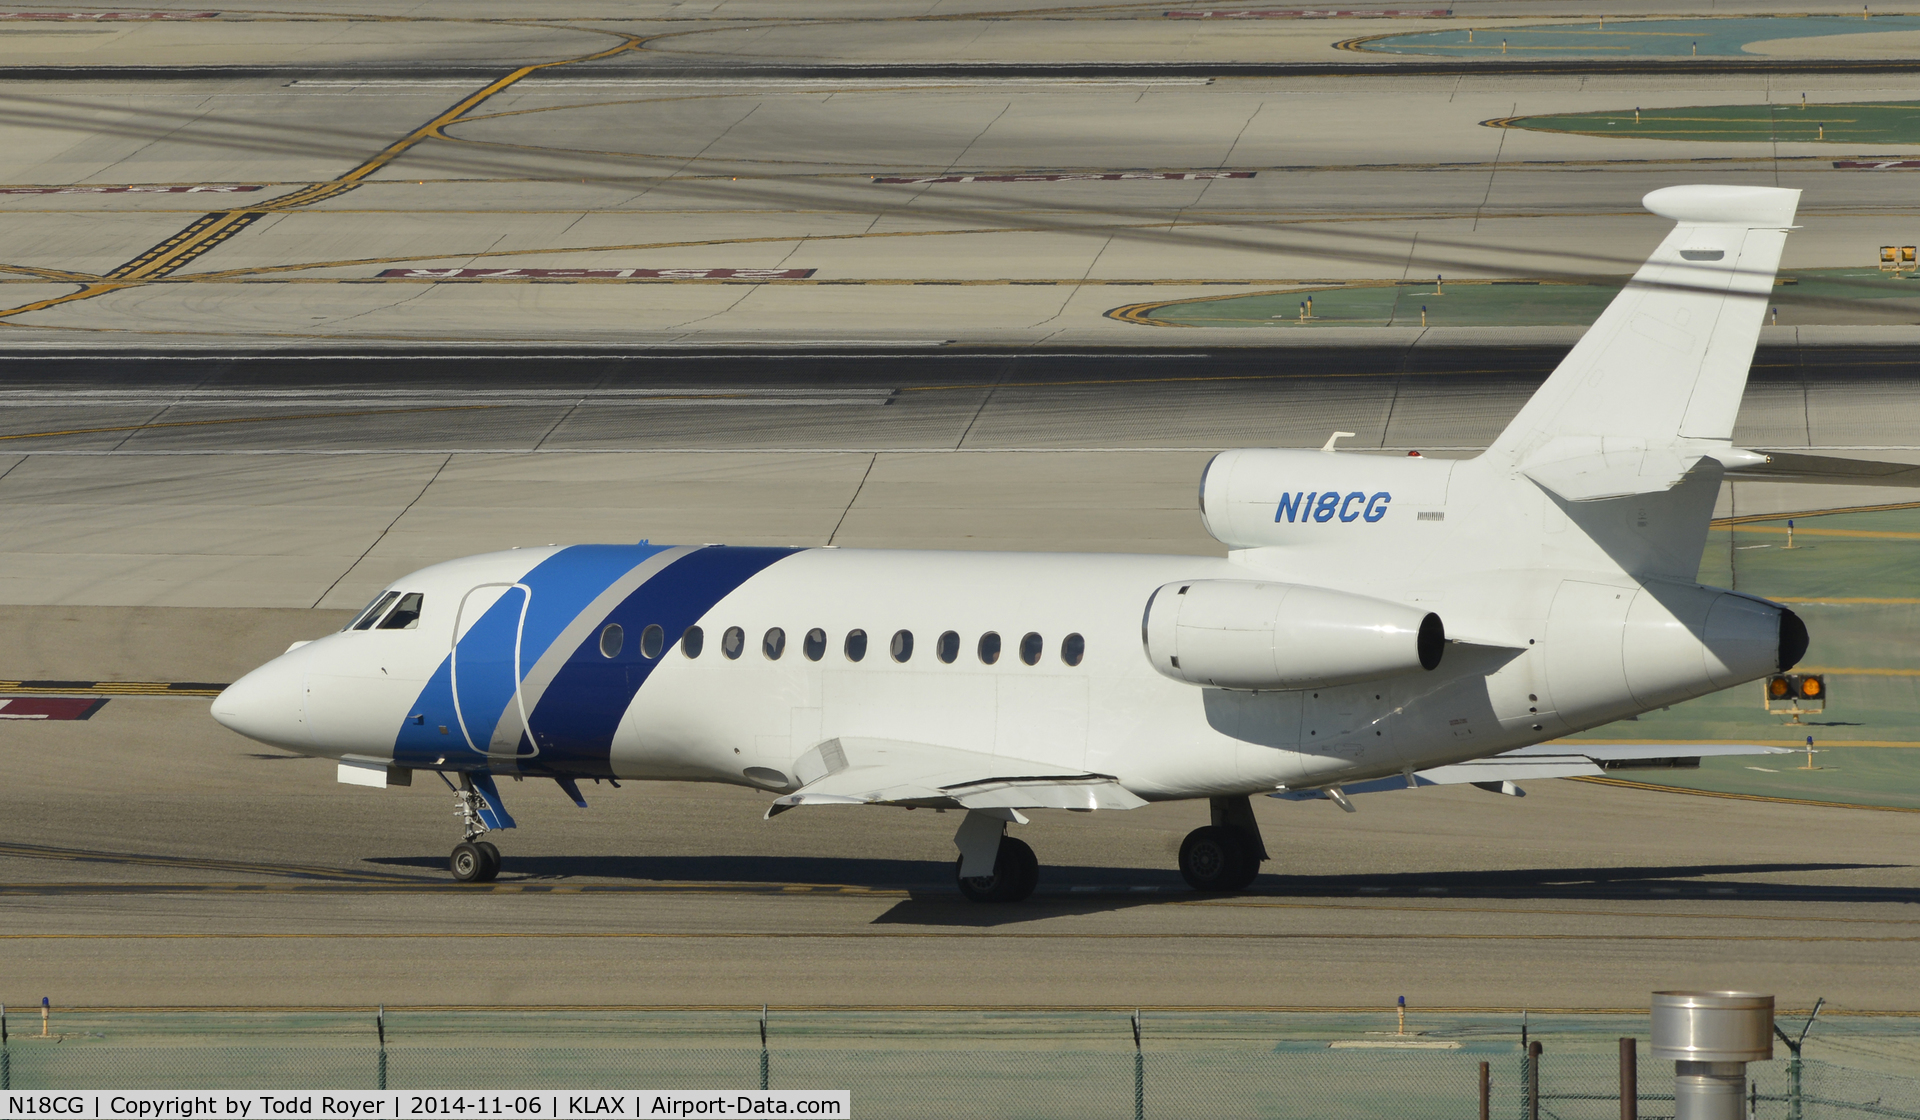 N18CG, 1998 Dassault Falcon 2000 C/N 57, Taxiing for departure at LAX